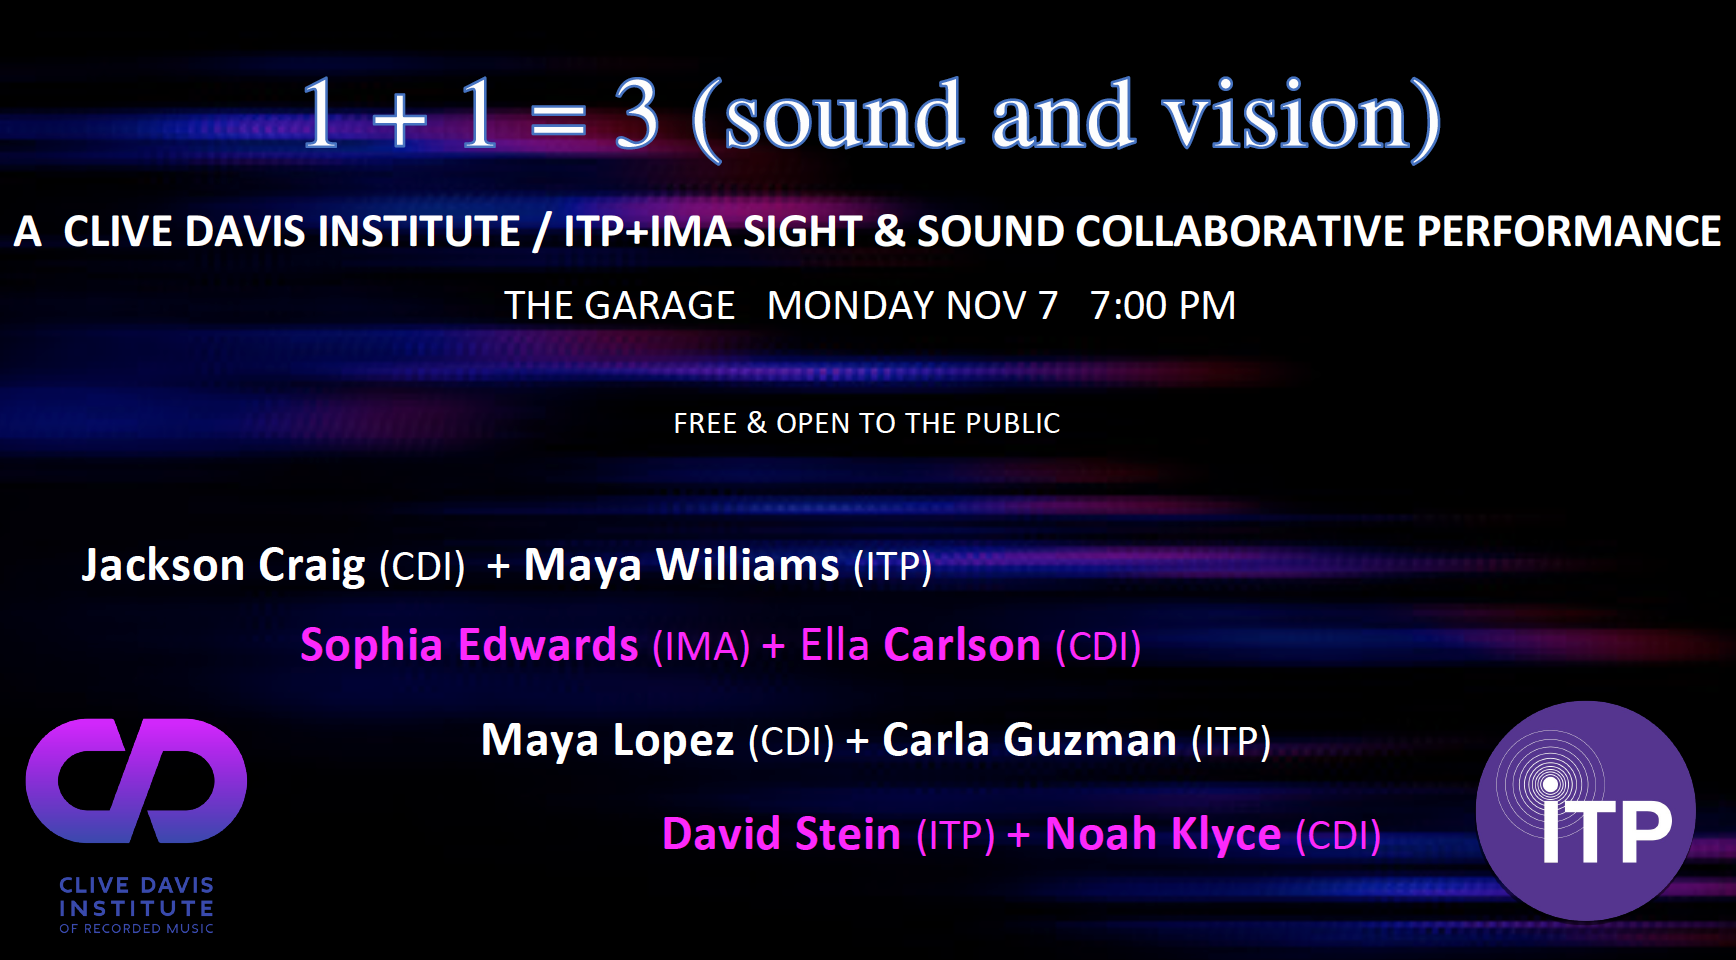  Students from ITP+IMA will collaborate on a sight and sound performance (1+1=3) with students from the Clive Davis Institute on Monday November 7th at 7:00pm in the Performance Garage at 370 Jay Street. This event is free and open to the public.   This event is featuring: Jackson Criag (CDI) with Maya Williams (ITP), Sophia Edwards (IMA) with Ella Carlson (CDI), Maya Lopez(CDI)+Carla Guzman (ITP) and David Stein (ITP) + Noah Kylce (CDI)